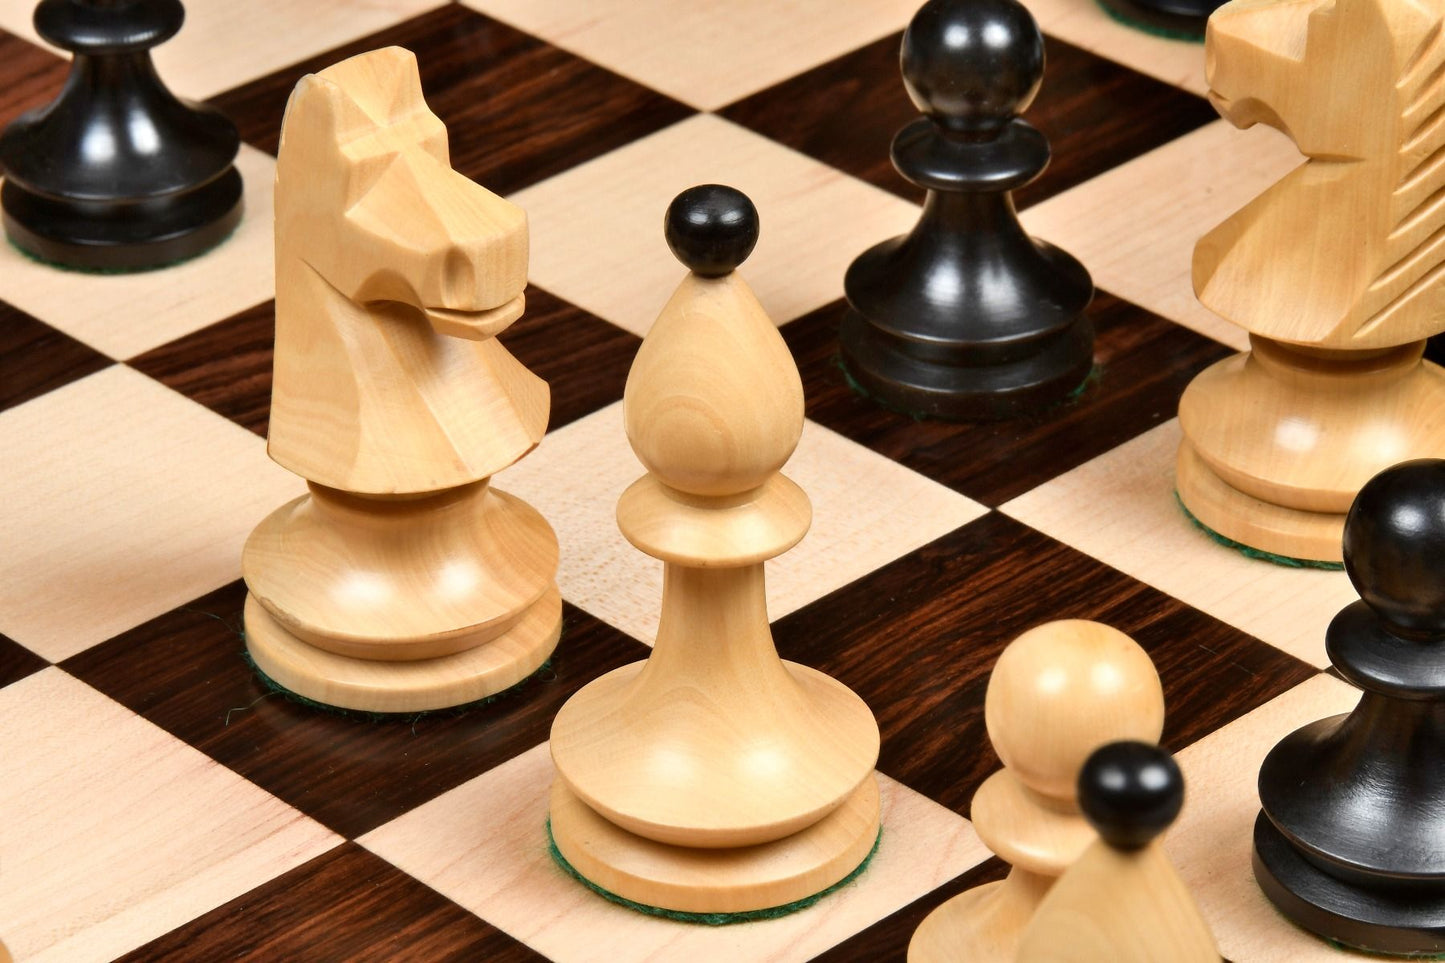 COMBO OF REPRODUCED ROMANIAN-HUNGARIAN NATIONAL TOURNAMENT CHESS PIECES IN EBONIZED & NATURAL BOXWOOD - 3.8" KING WITH WOODEN ROSEWOOD CHESS BOARD - 20"